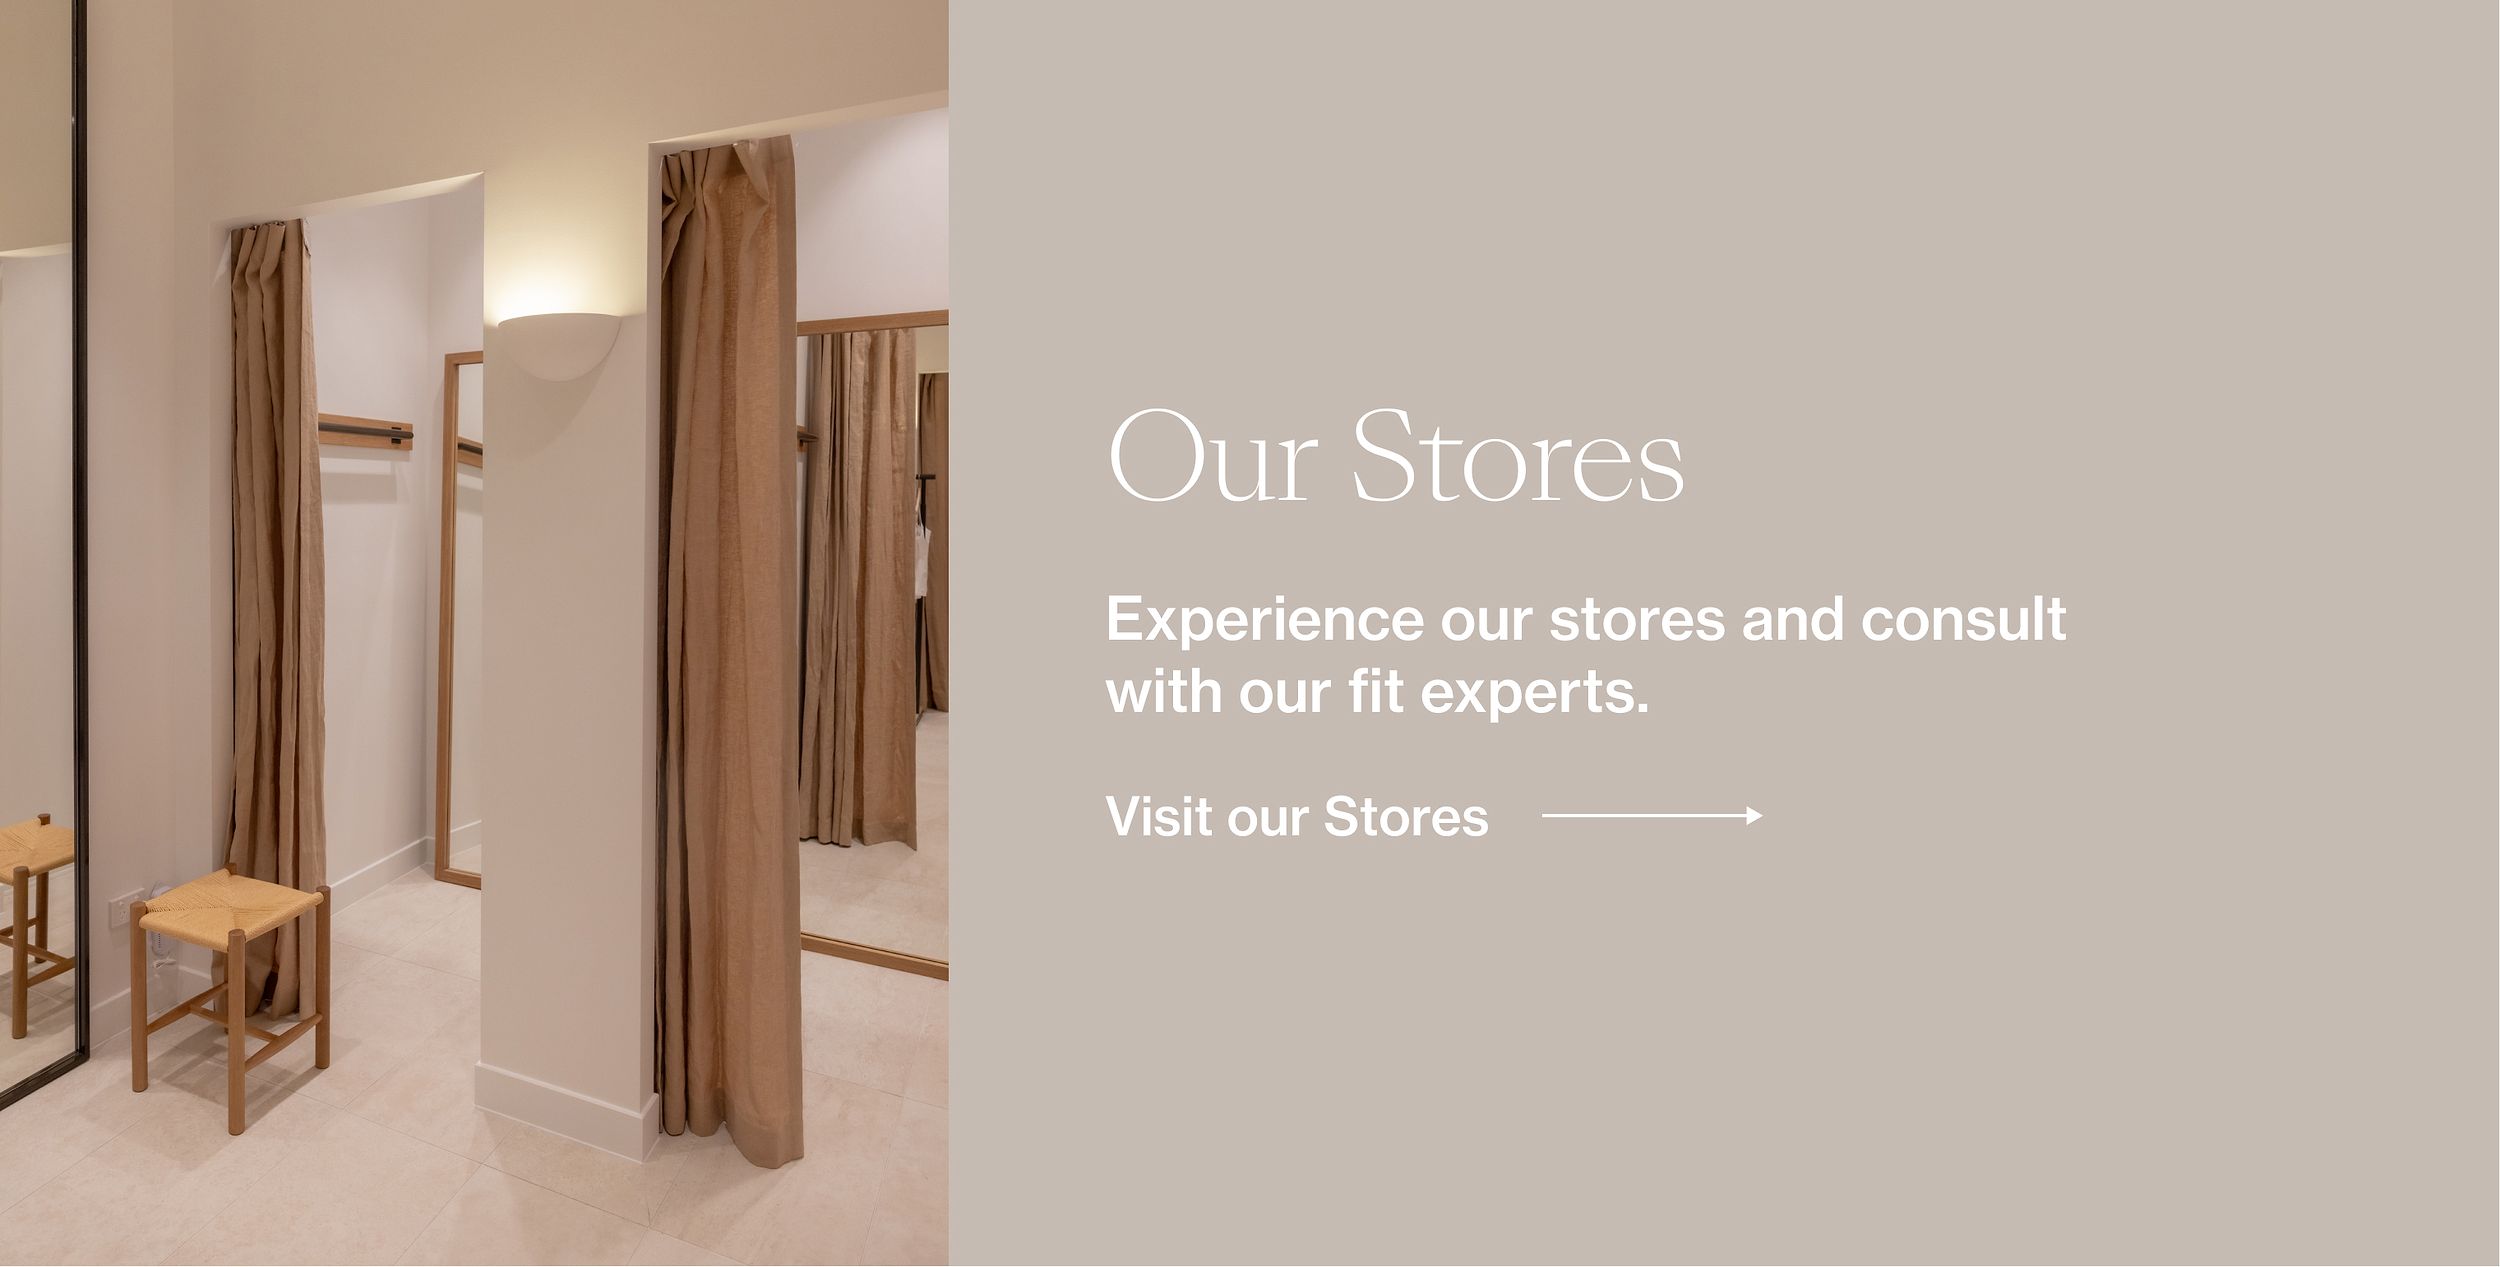 Our Stores